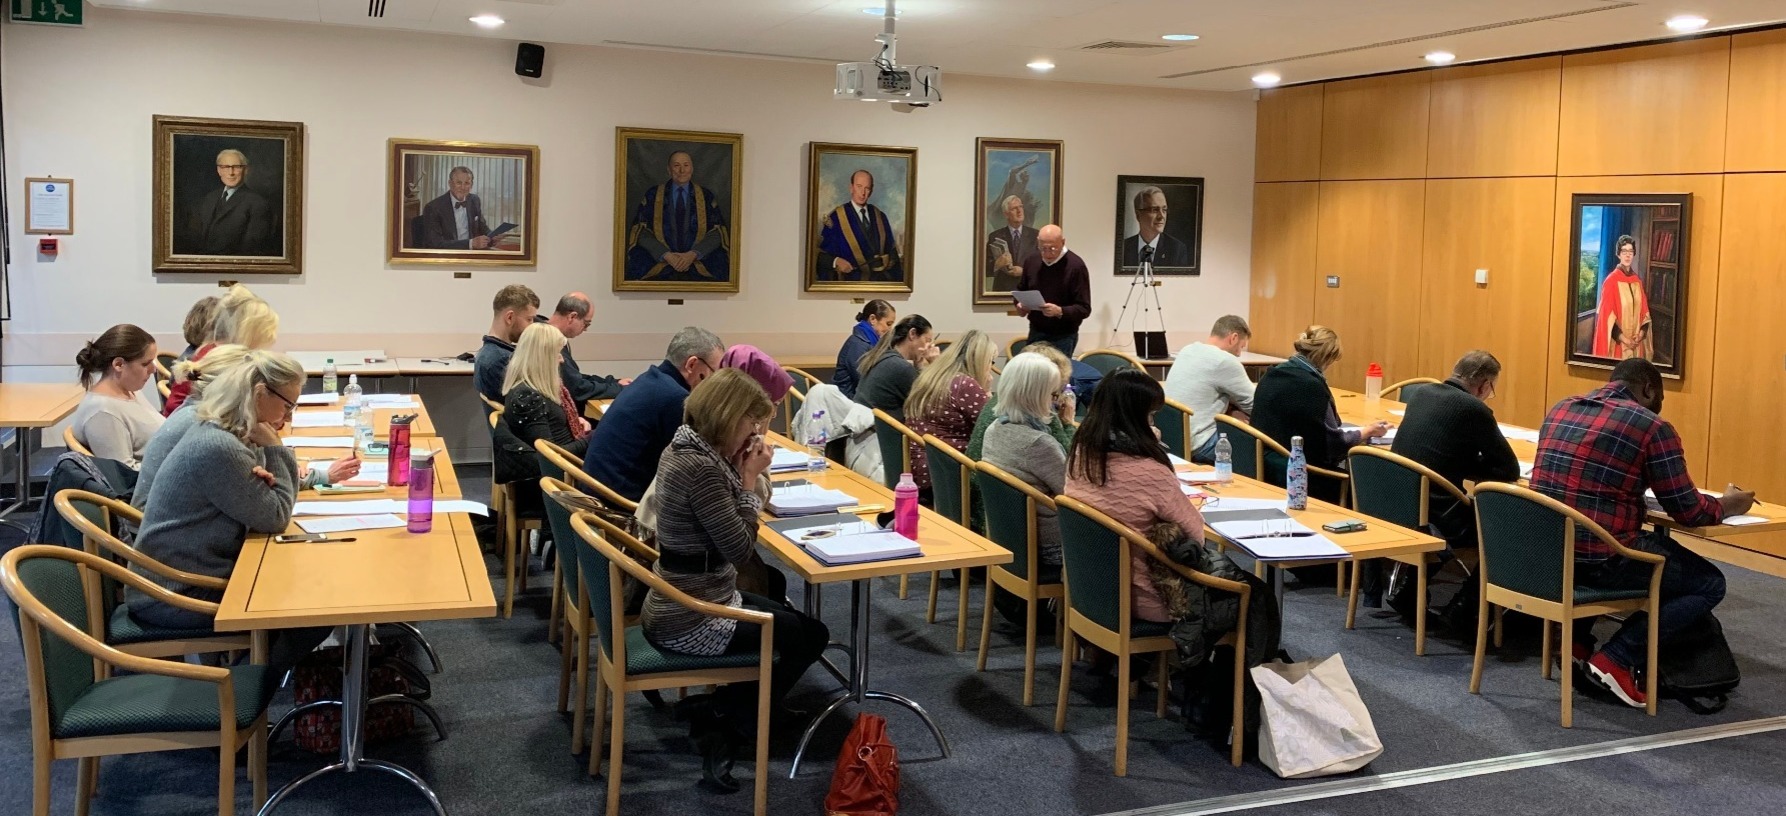 Hypnotherapy Training In The Oak Suite At The University Of Surrey